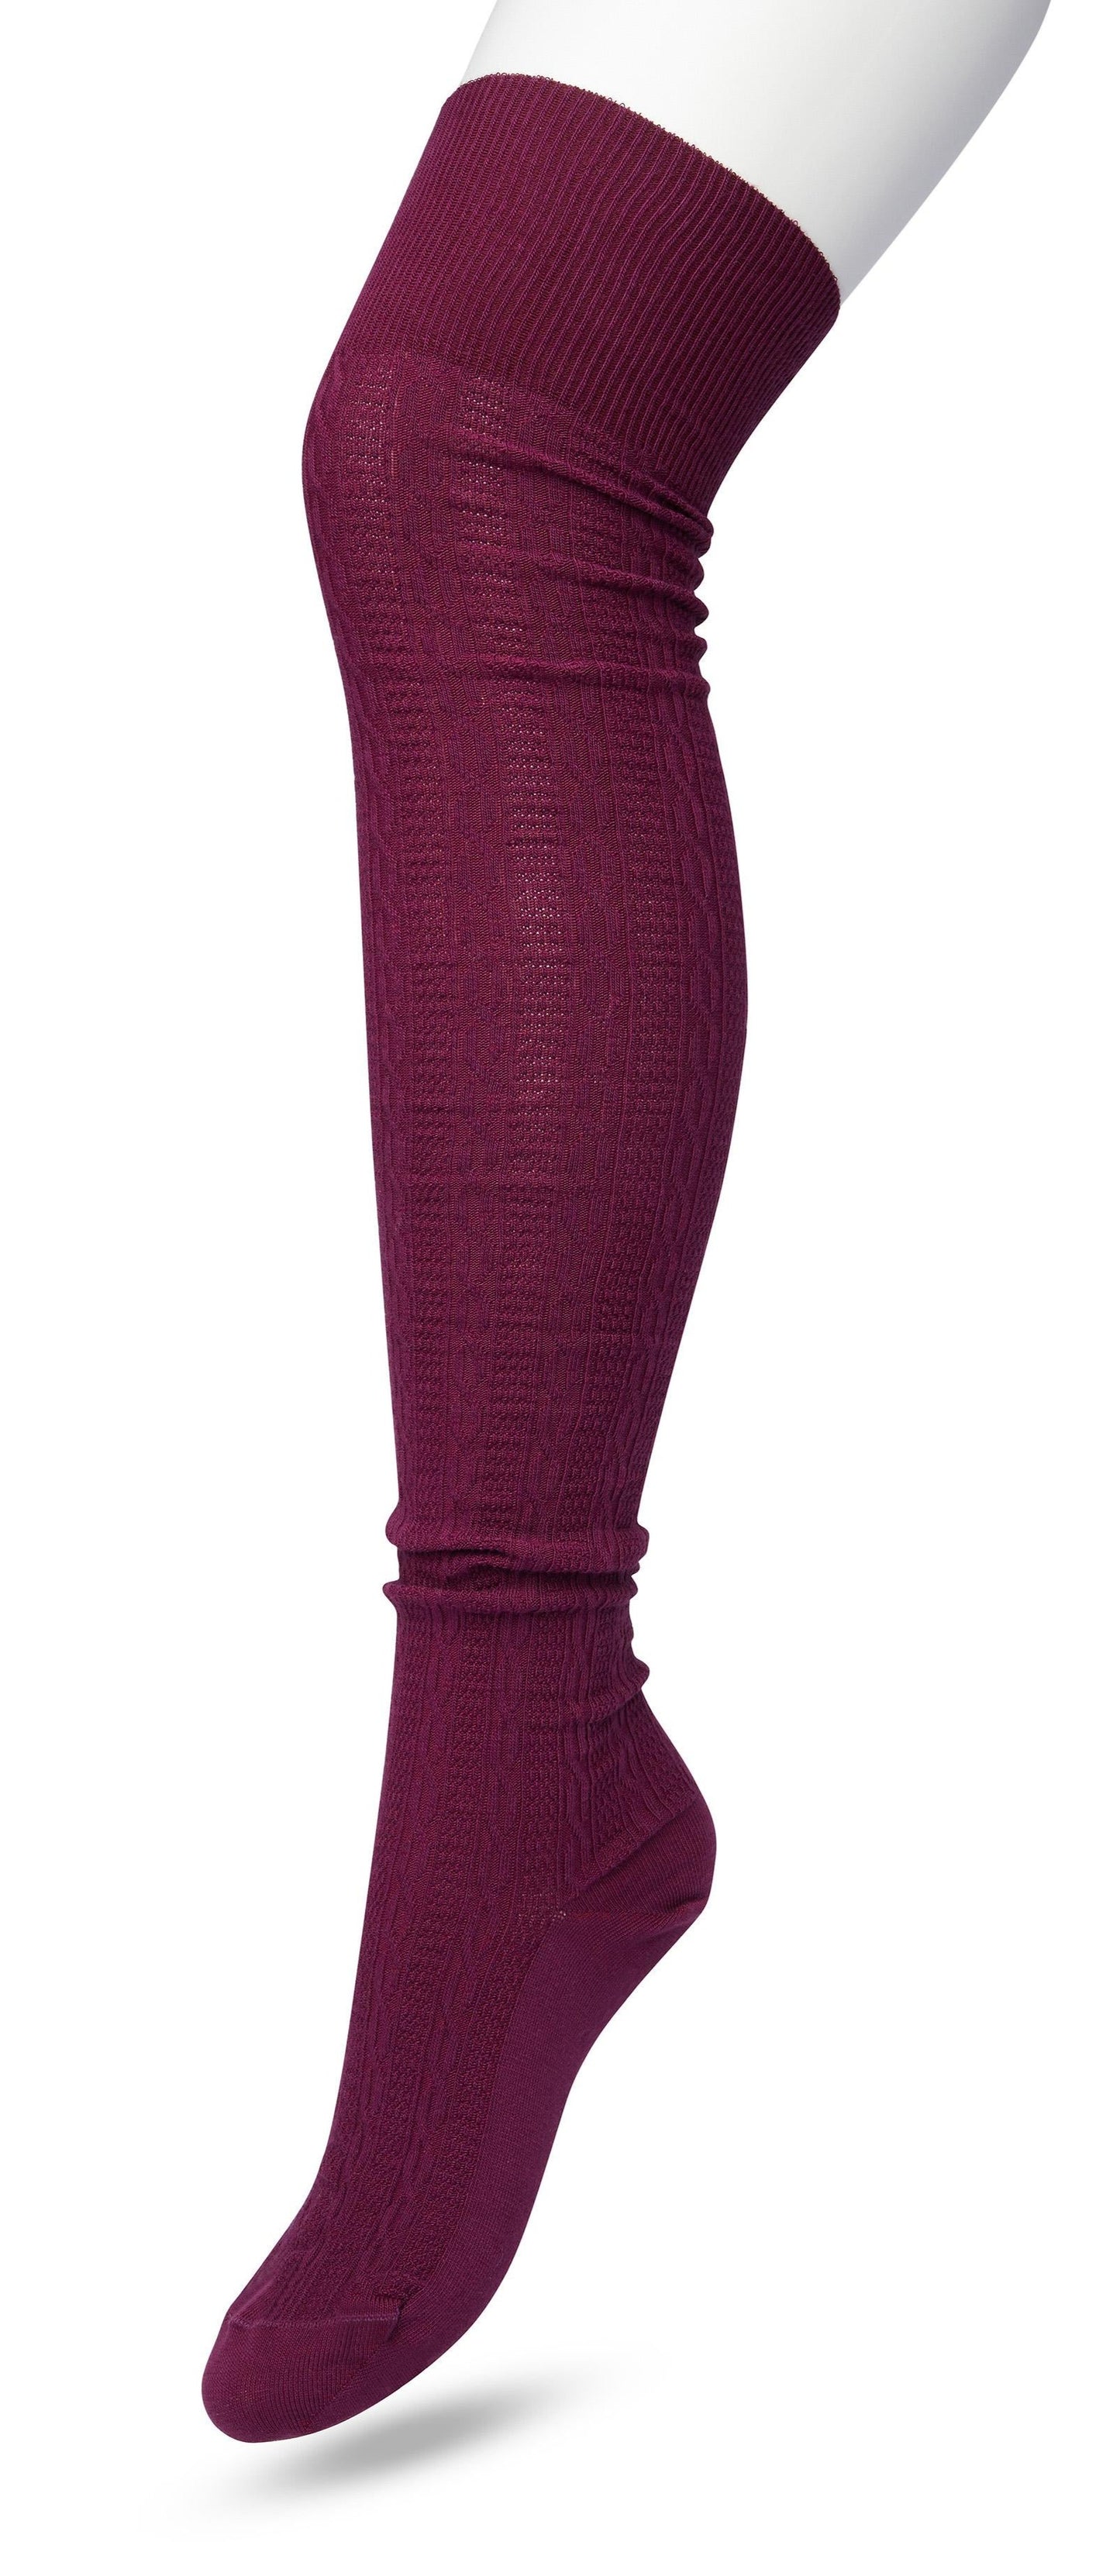 Bonnie Doon Cable Over-Knee Sock - Wine (crushed violets) cotton knitted over the knee socks with a cable knit style ribbed pattern 